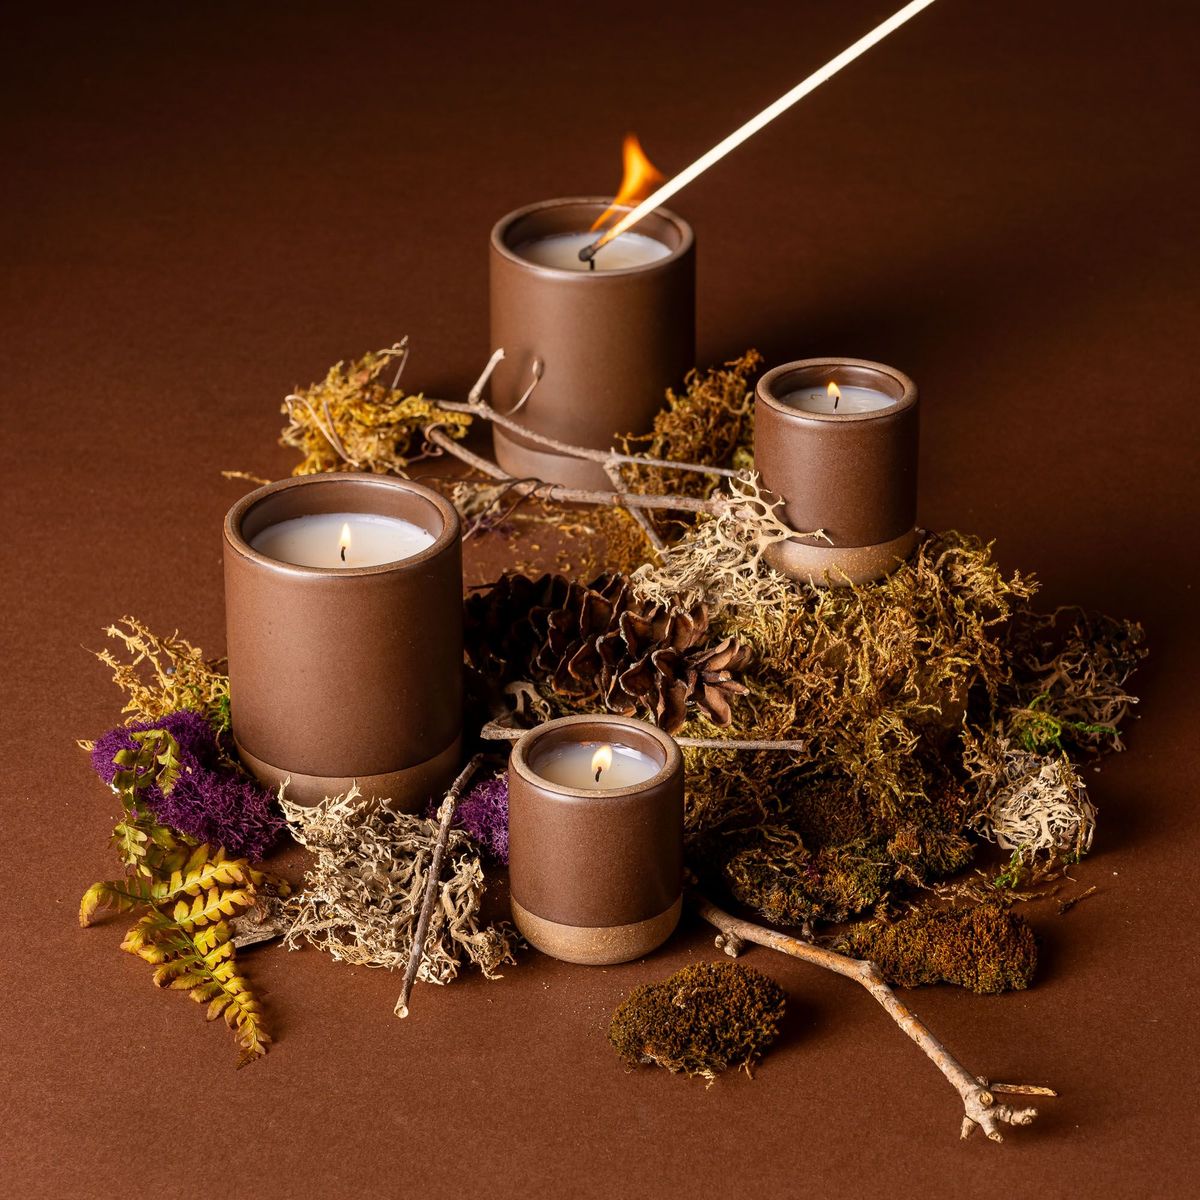 Four lit candles in ceramic vessels in a dark brown color with a match lighting one. They are artfully arranged and surrounded by dried grass, branches, and fern leaves.